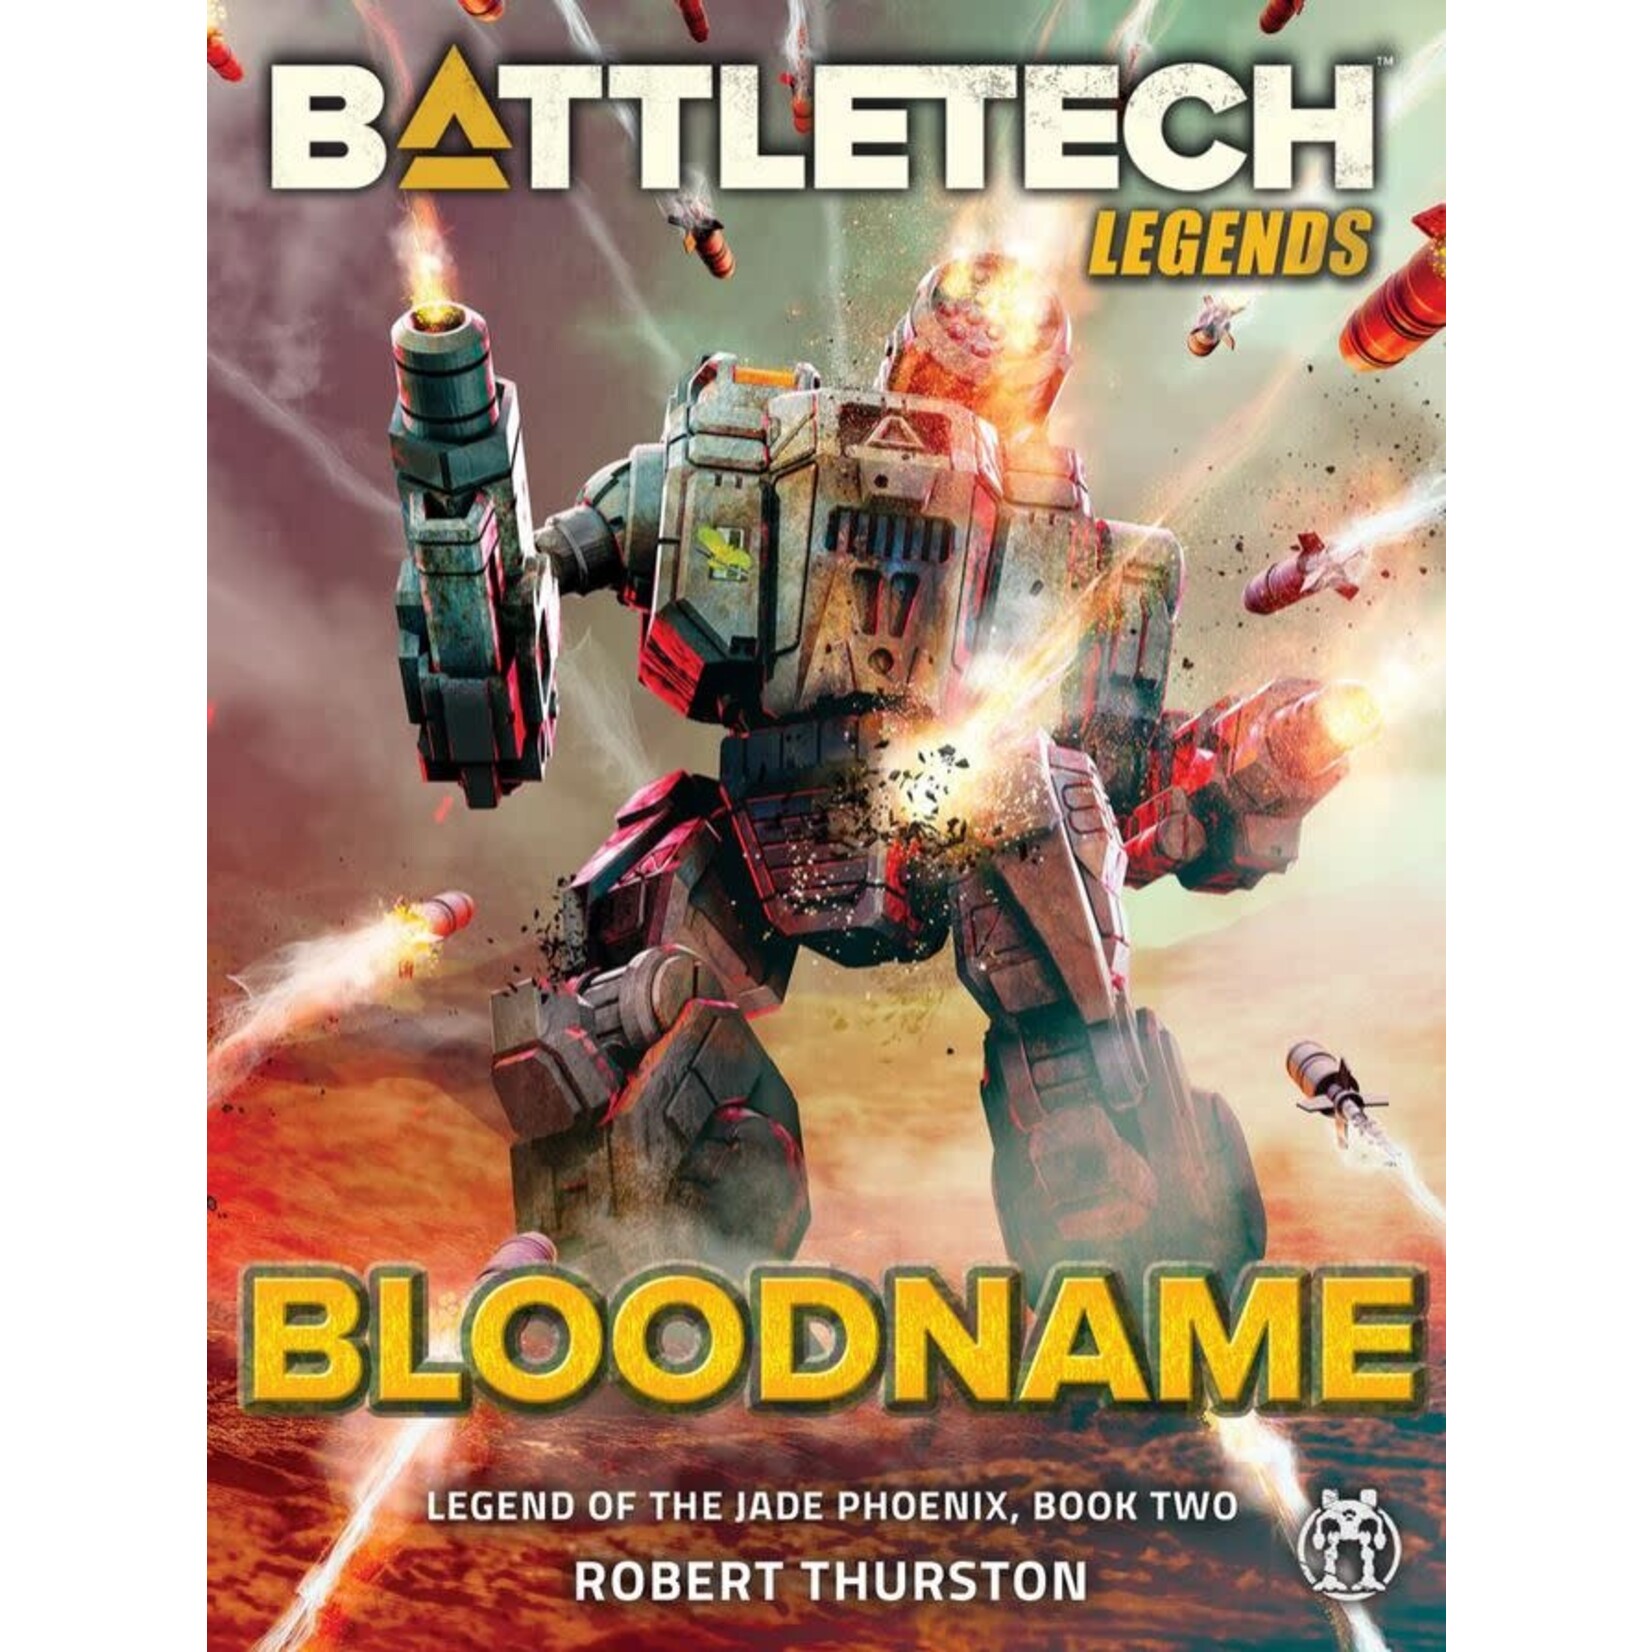 BattleTech: Legend of the Jade Phoenix - Book Two - Bloodname Hardcover (Preorder)